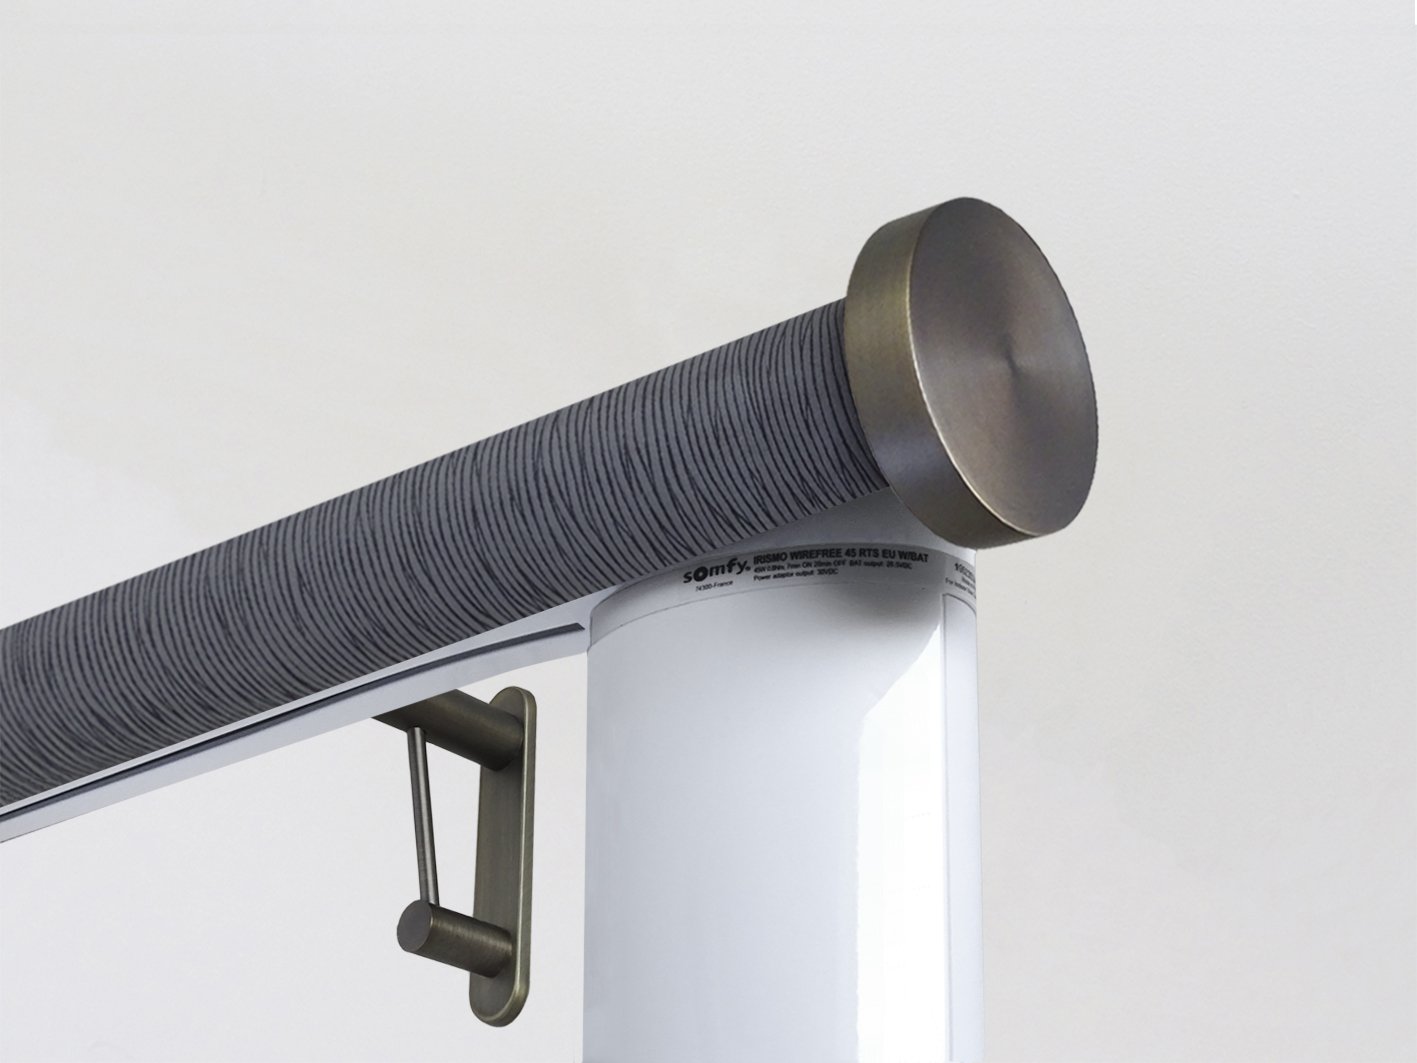 Motorised electric curtain pole in flint blue, wireless & battery powered using the Somfy Glydea track | Walcot House UK curtain pole specialists